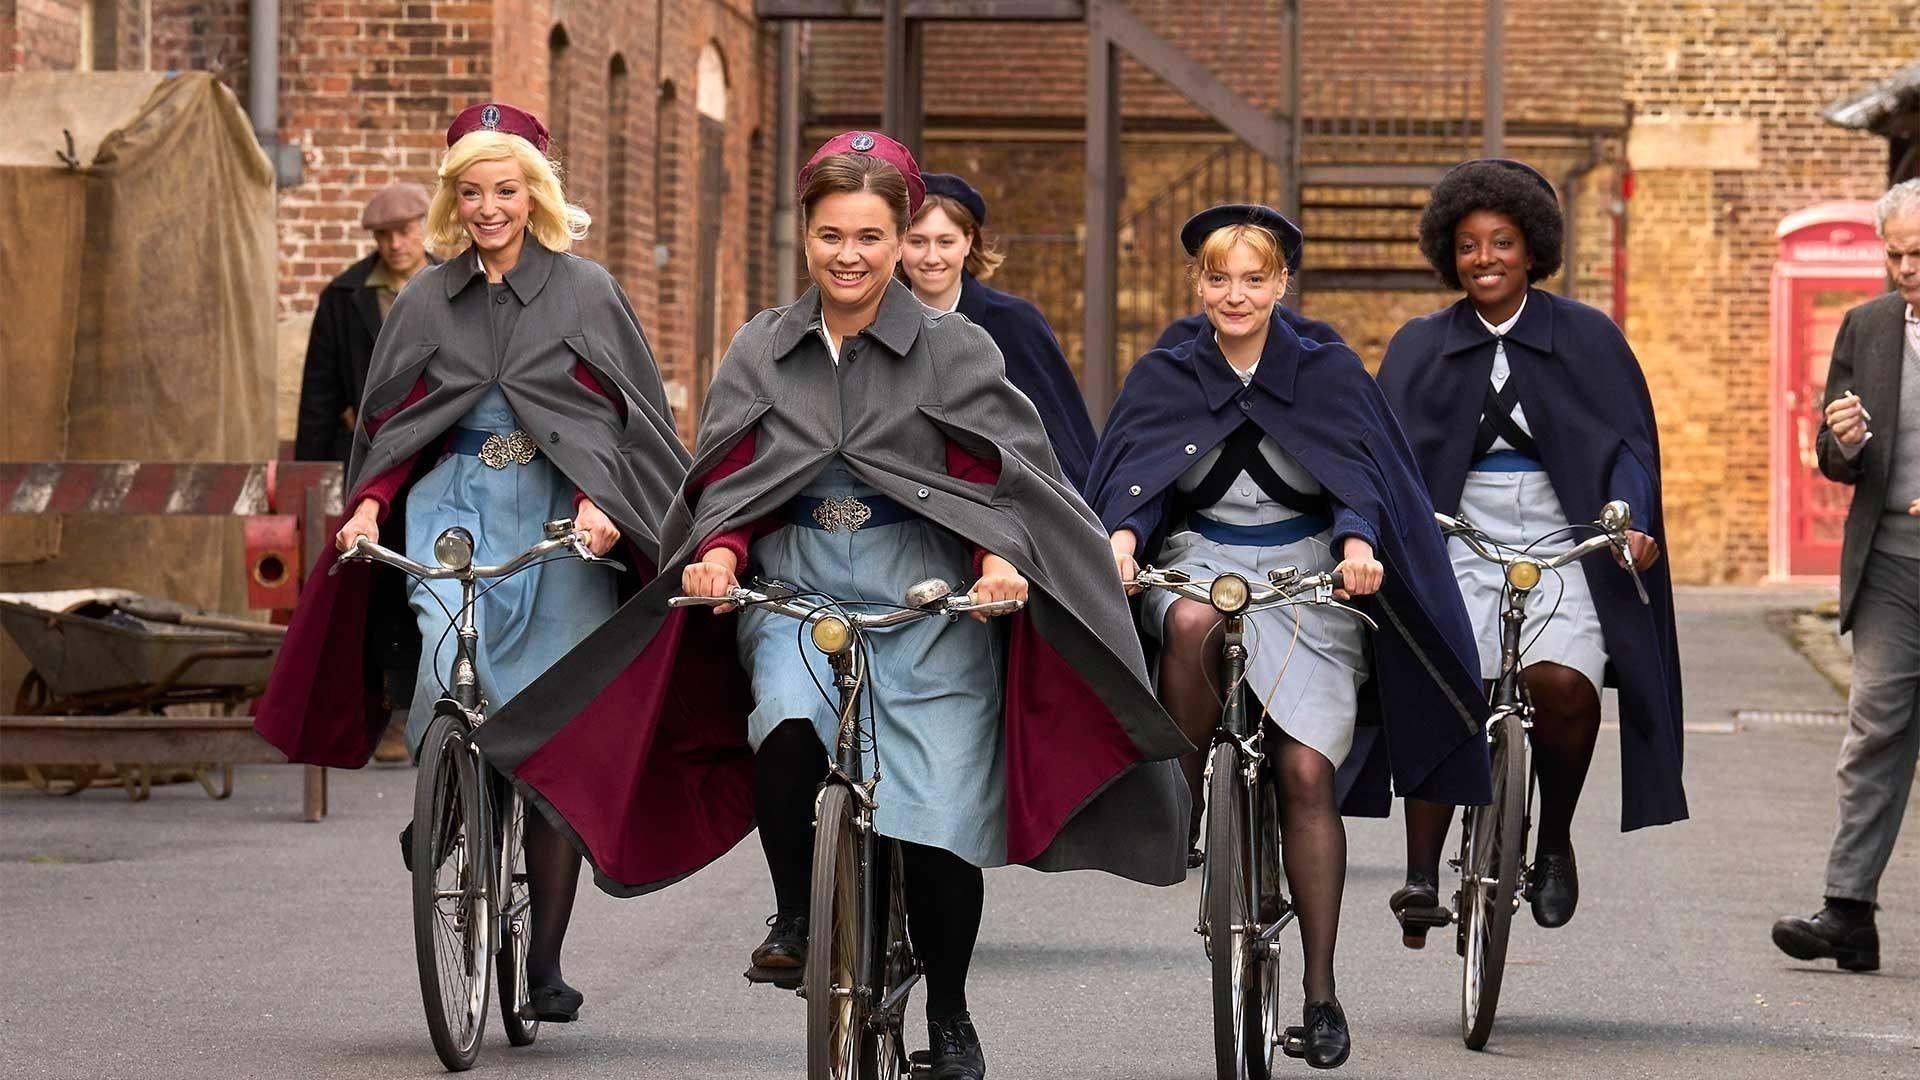 Cast members of Call the Midwife ride their bicycles.